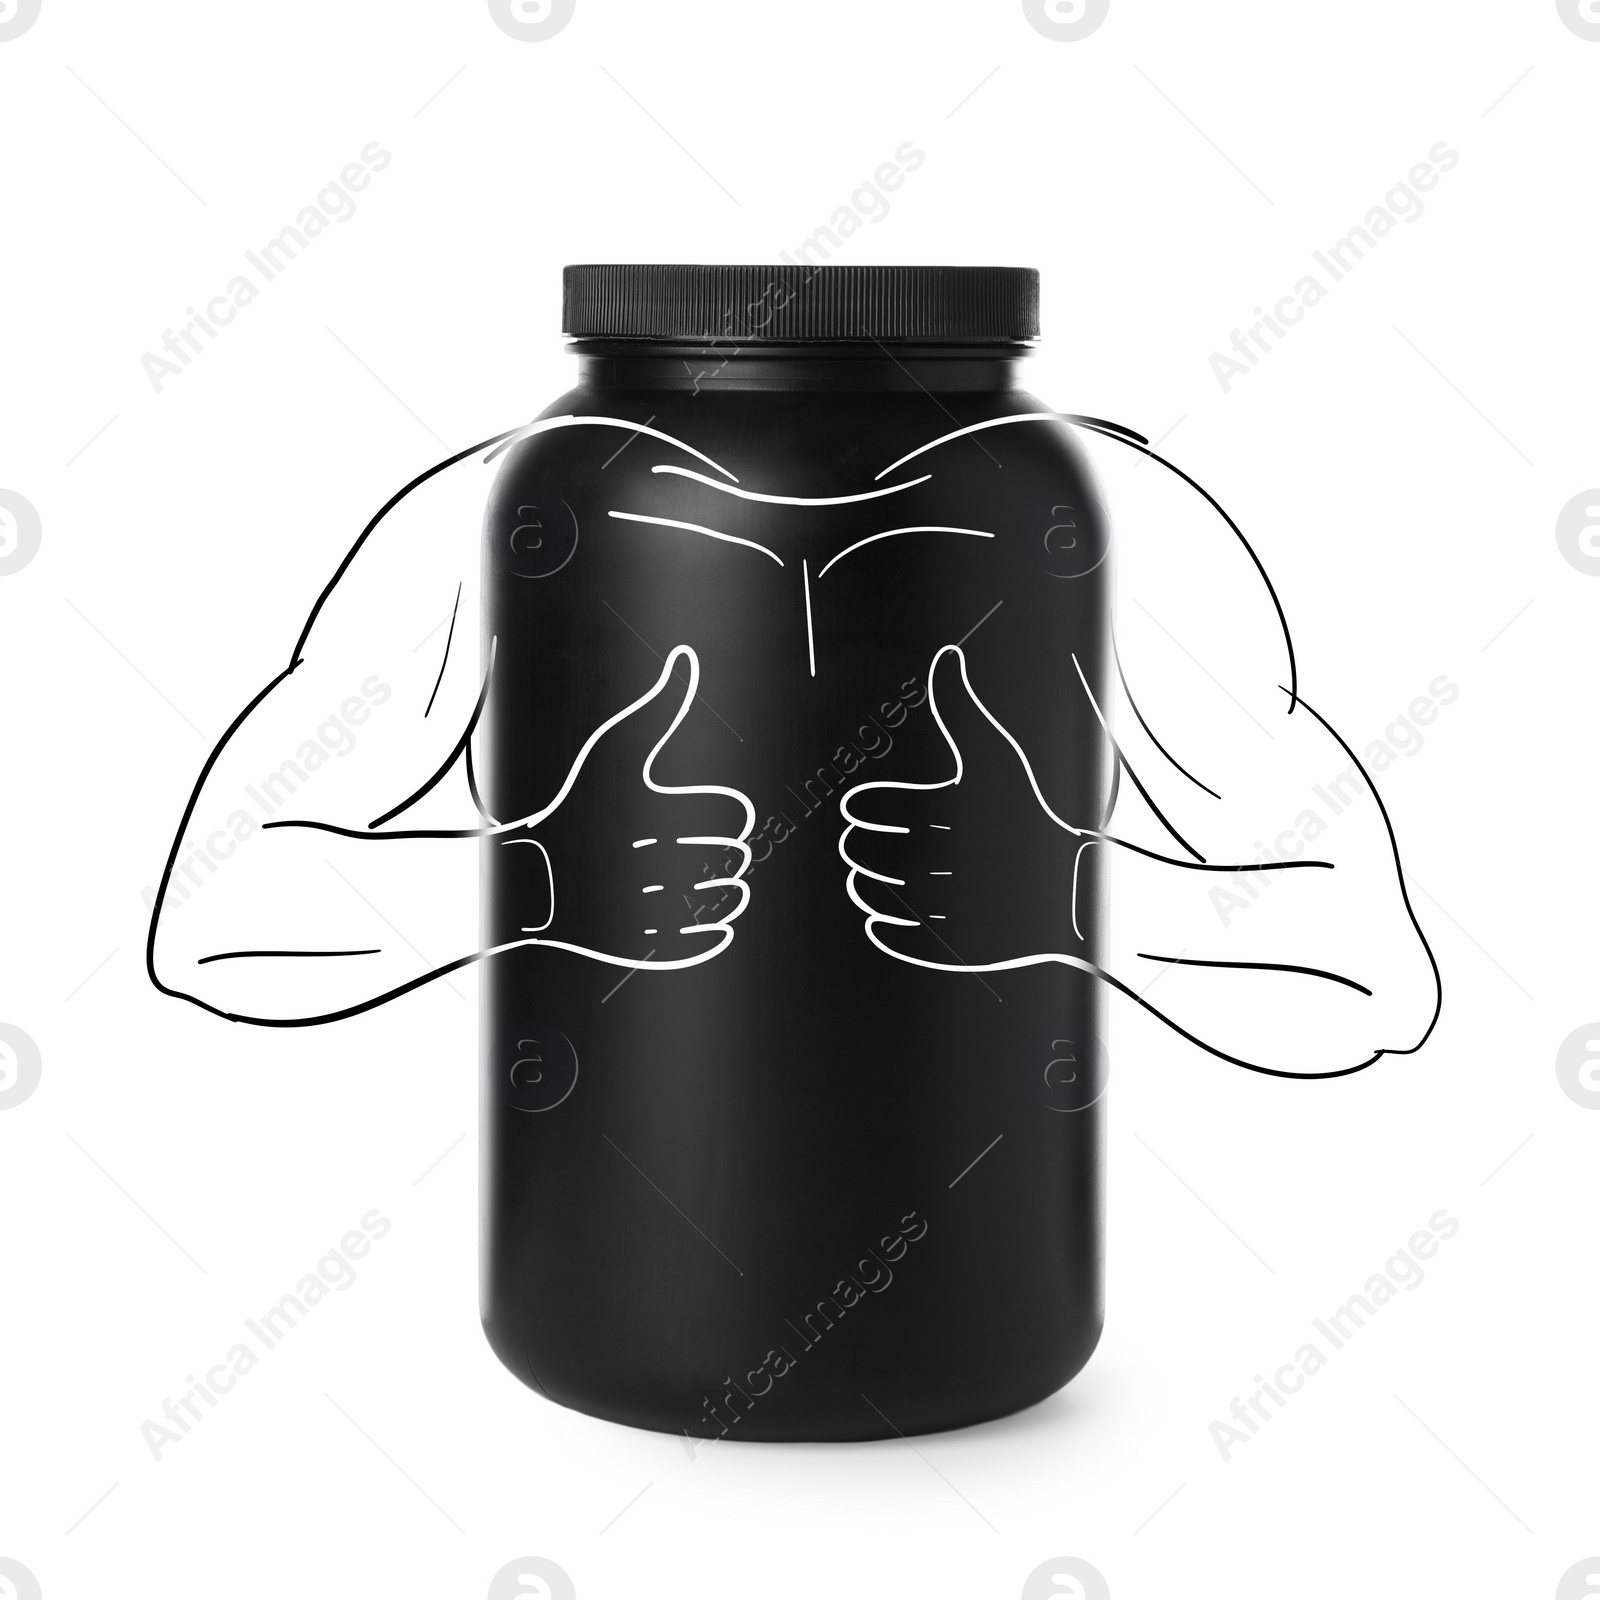 Image of Black jar of protein powder with illustration of bodybuilder showing thumbs up gesture on white background